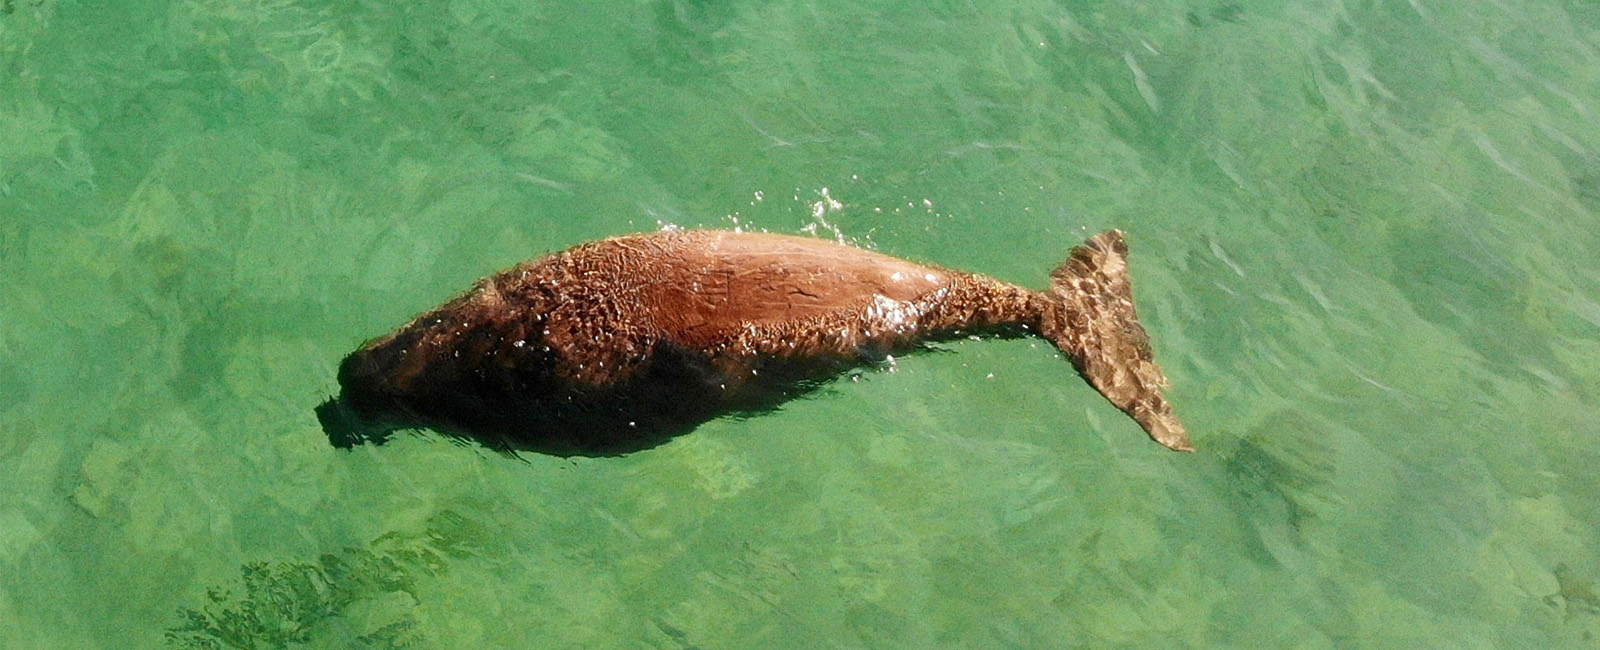 A dugong swimming in crystal clear waters, as seen from above.